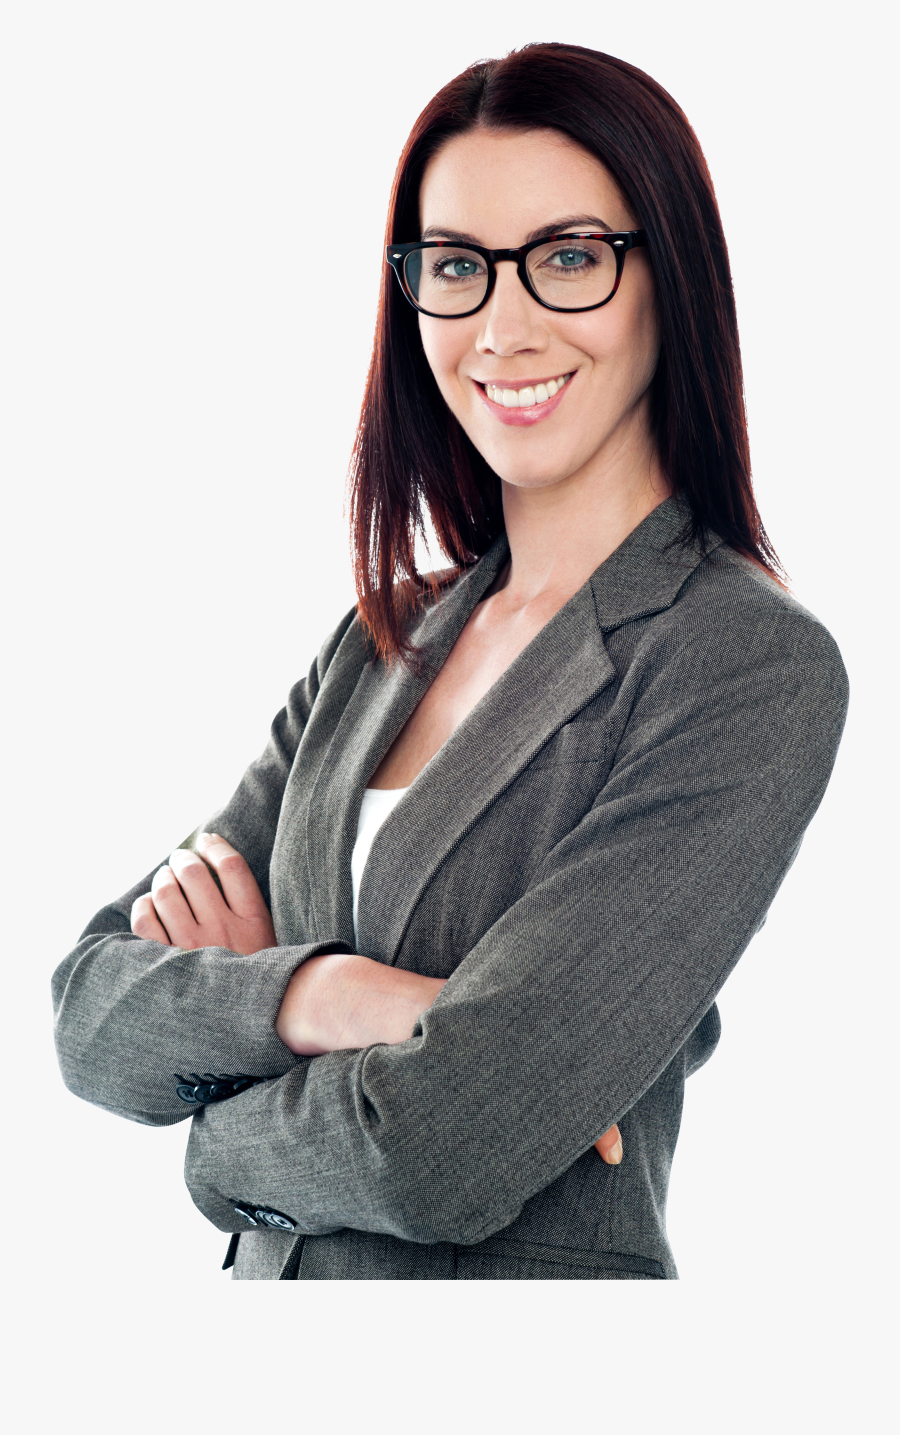 Specs Girl Png Image - Corporate Lady, Transparent Clipart